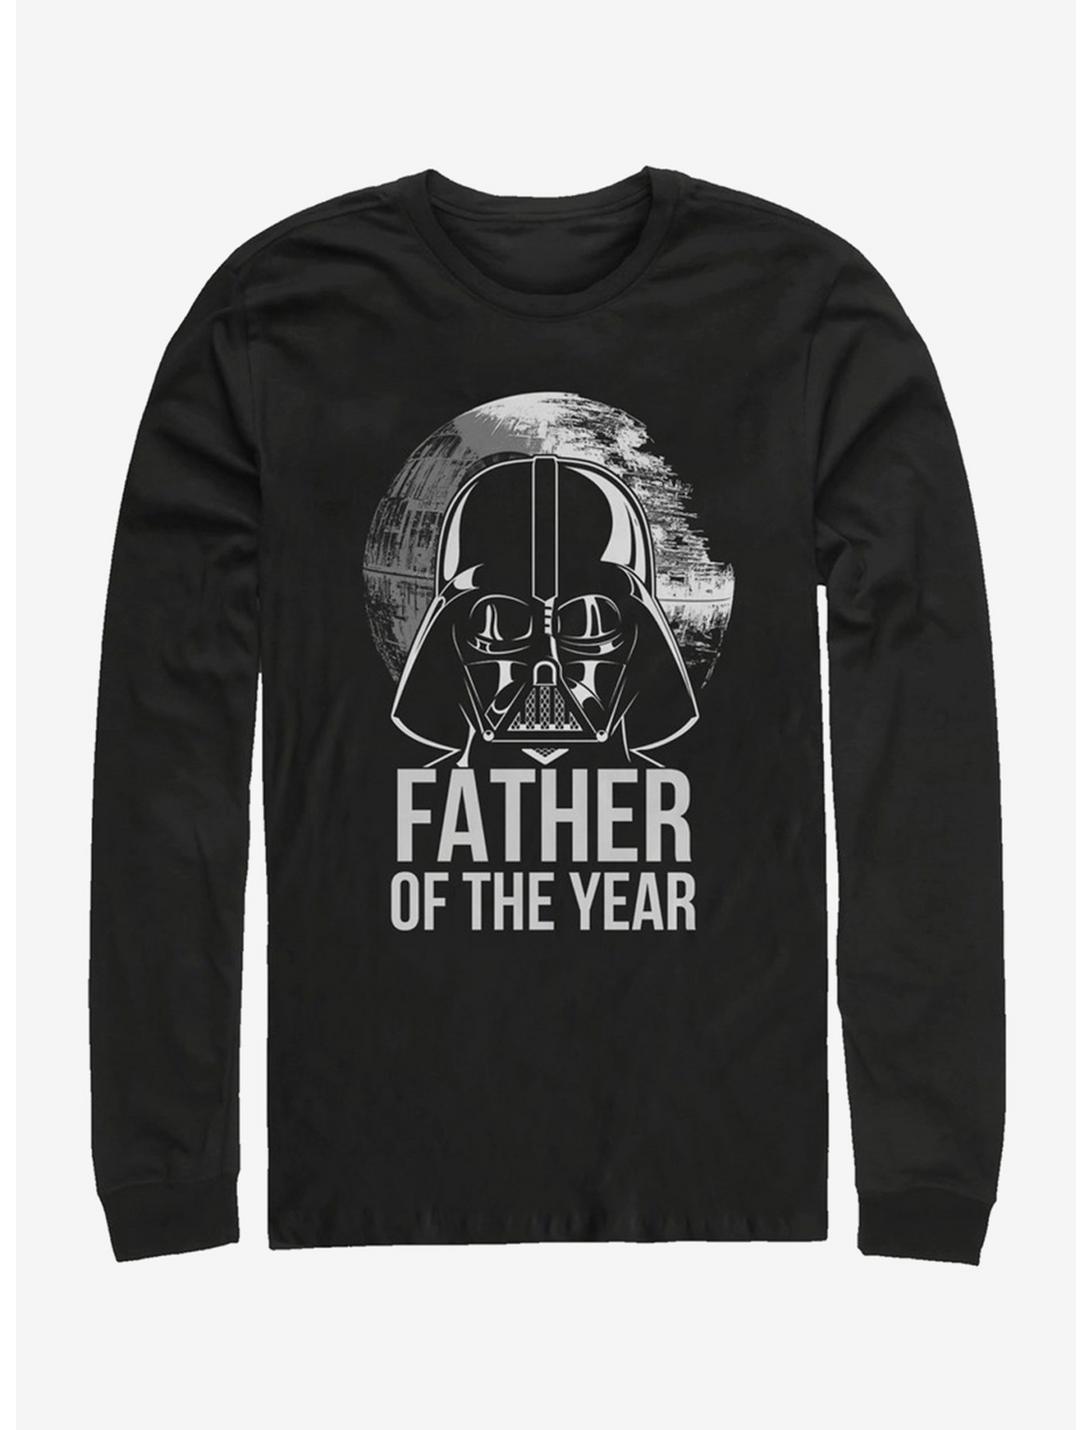 Star Wars Father of the Year Long-Sleeve T-Shirt, BLACK, hi-res